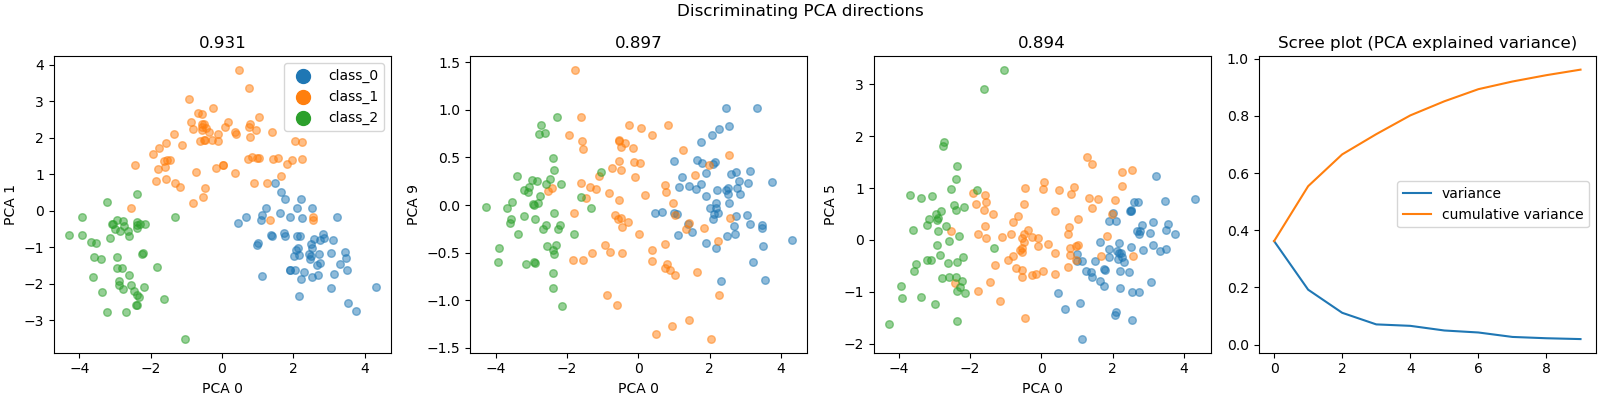 Discriminating PCA directions, 0.931, 0.897, 0.894, Scree plot (PCA explained variance)